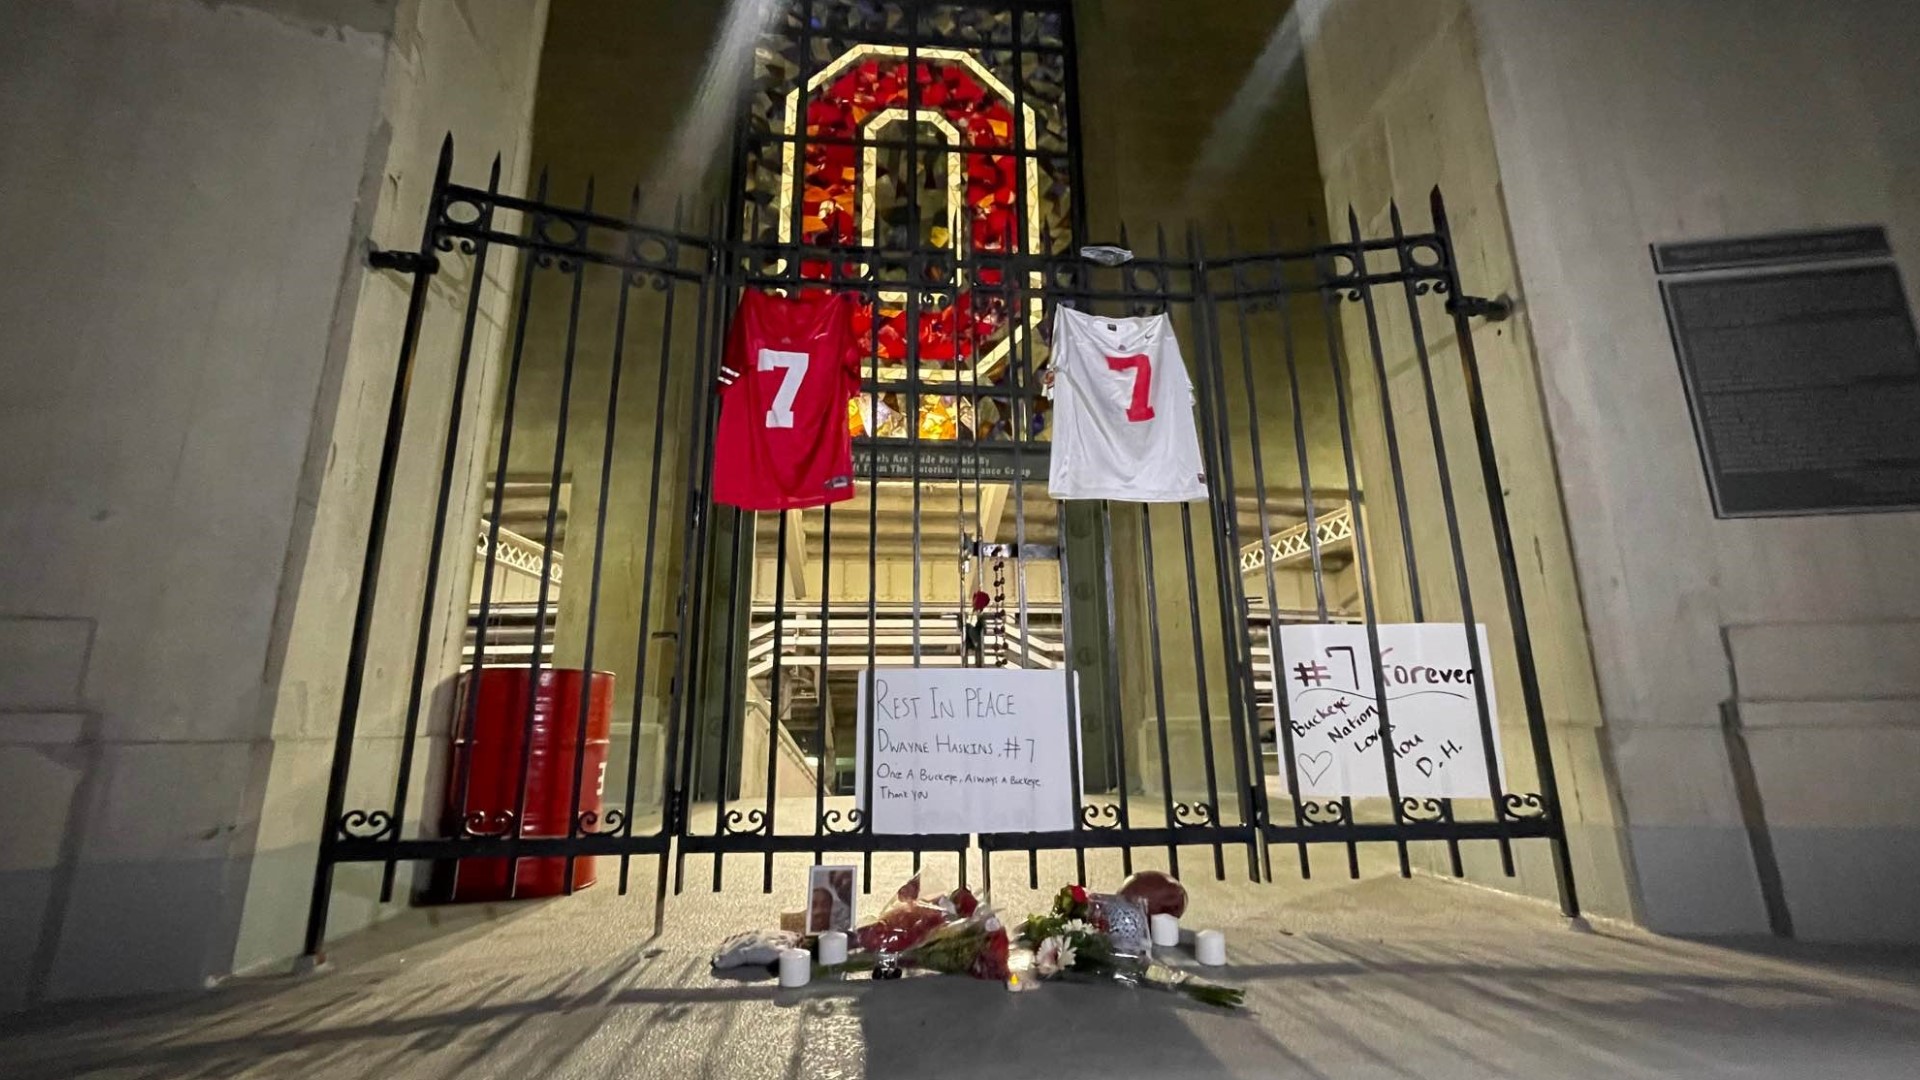 The memorial features two #7 jerseys, flowers and signs remembering for Buckeye standout.